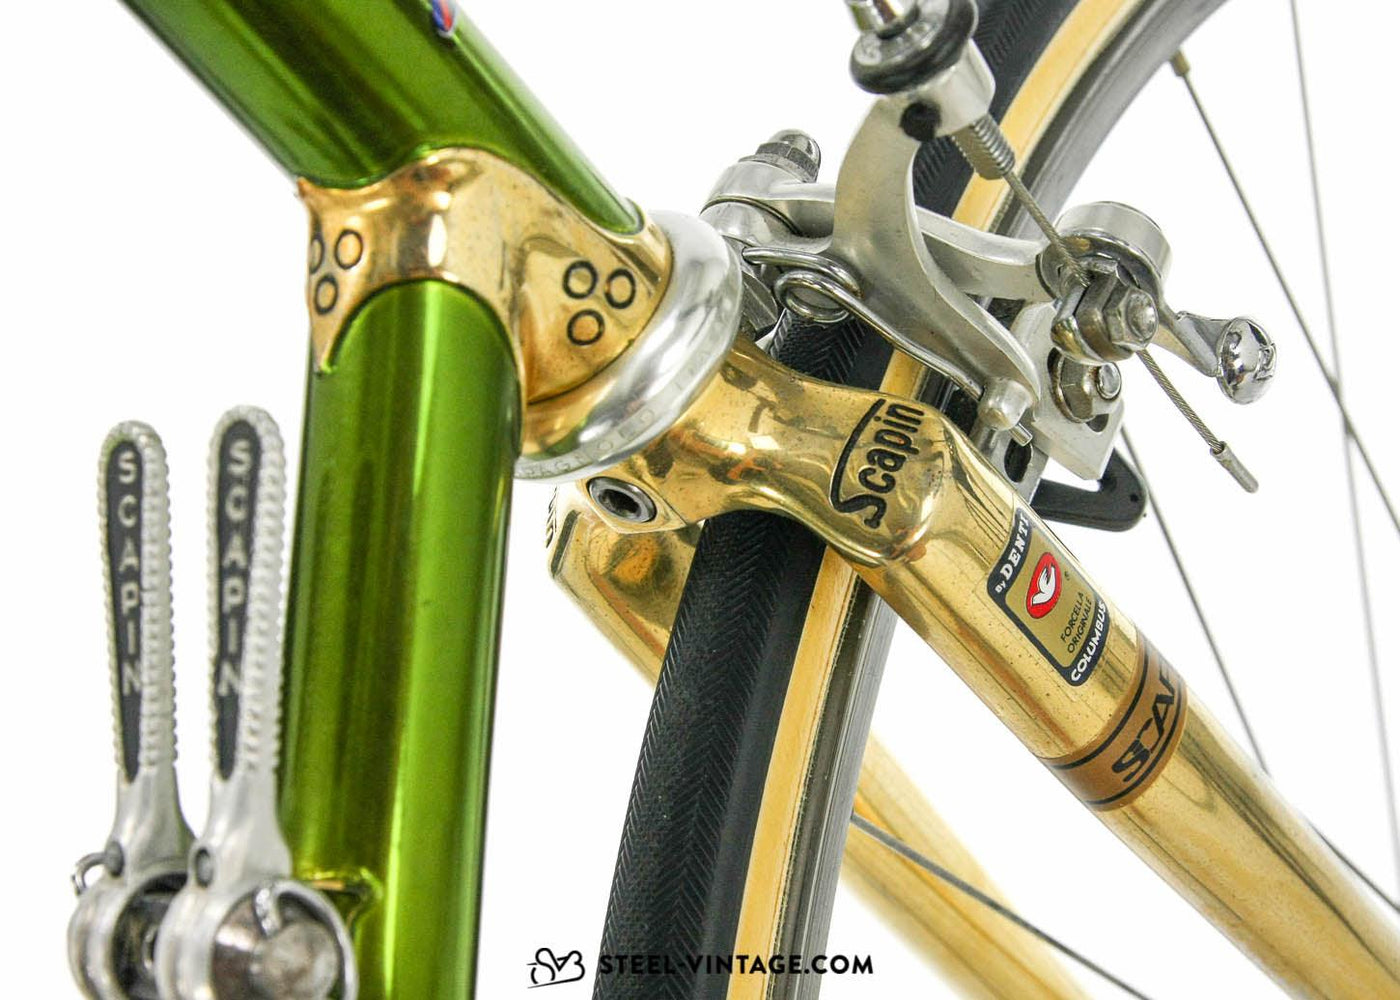 Scapin Airone Gold Plated Vintage Bike 1982 - Steel Vintage Bikes